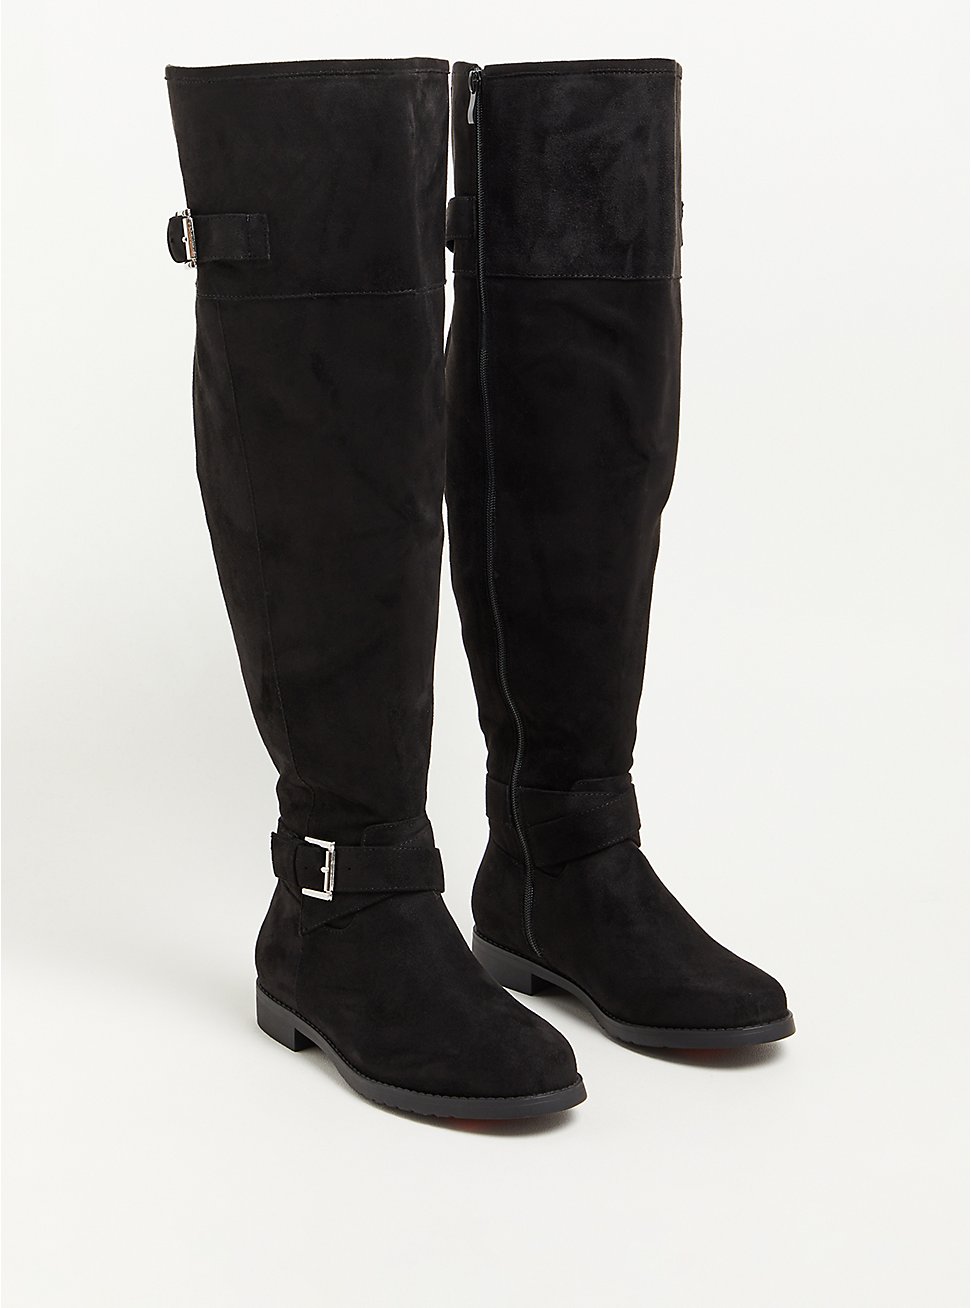 Double Buckle Over The Knee Boot (WW), BLACK, hi-res